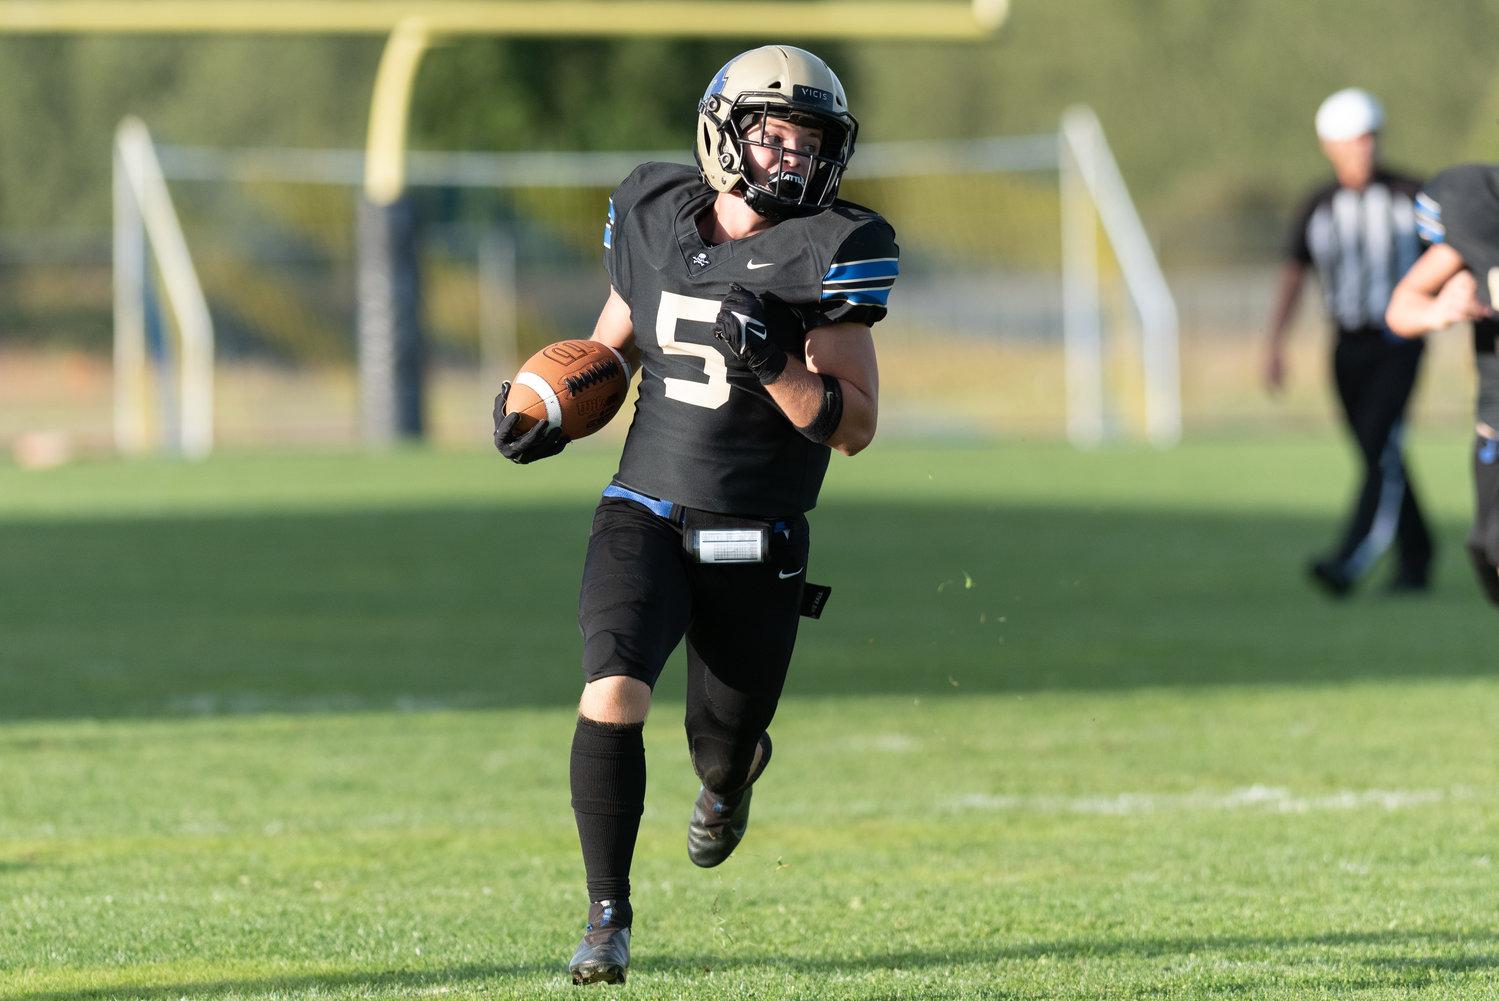 Jaxon Gunnagan carries the ball downfield in Adna's 56-6 win over White Swan on Sept. 16.